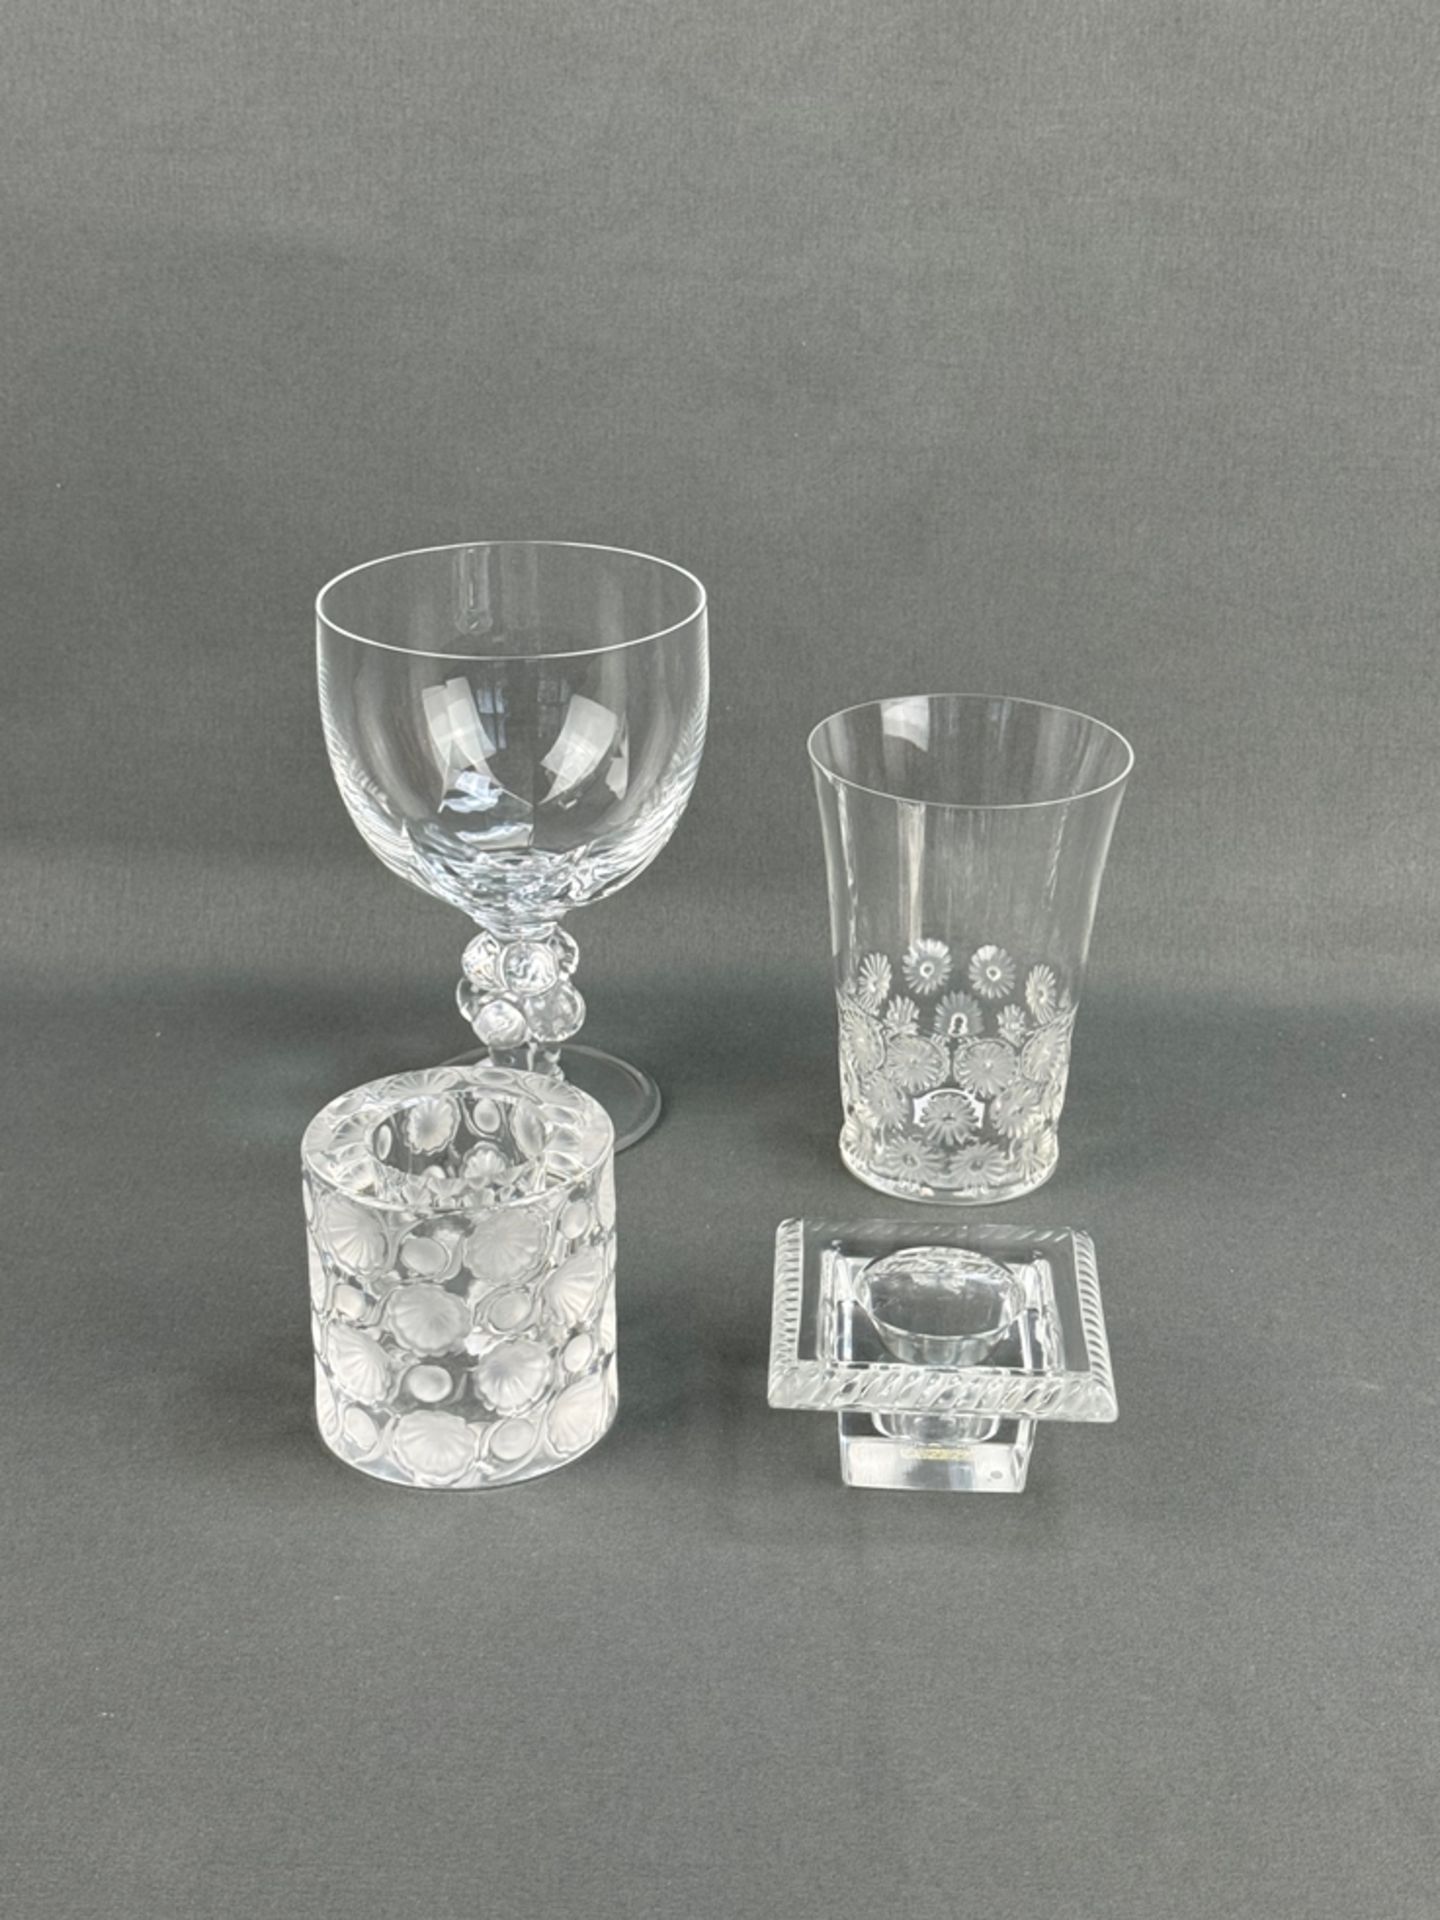 Four pieces, Lalique, colourless glass, all signed on the base, consisting of: fine goblet, stem de